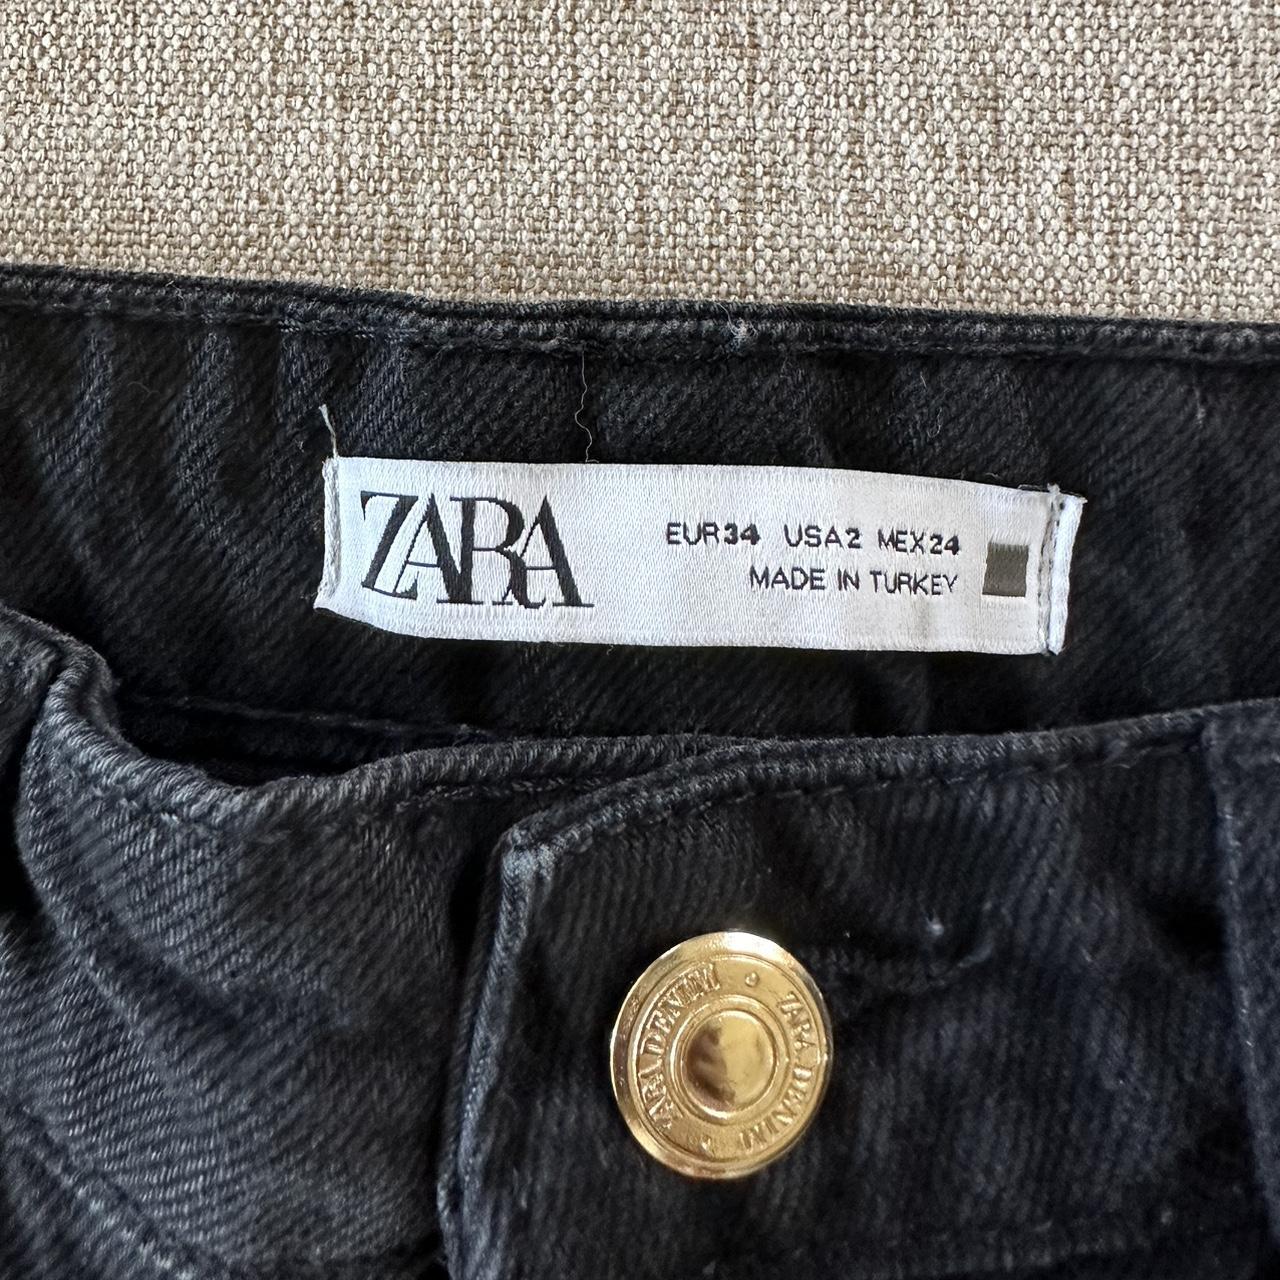 Zara long baggy black jeans with rips at the knees. - Depop